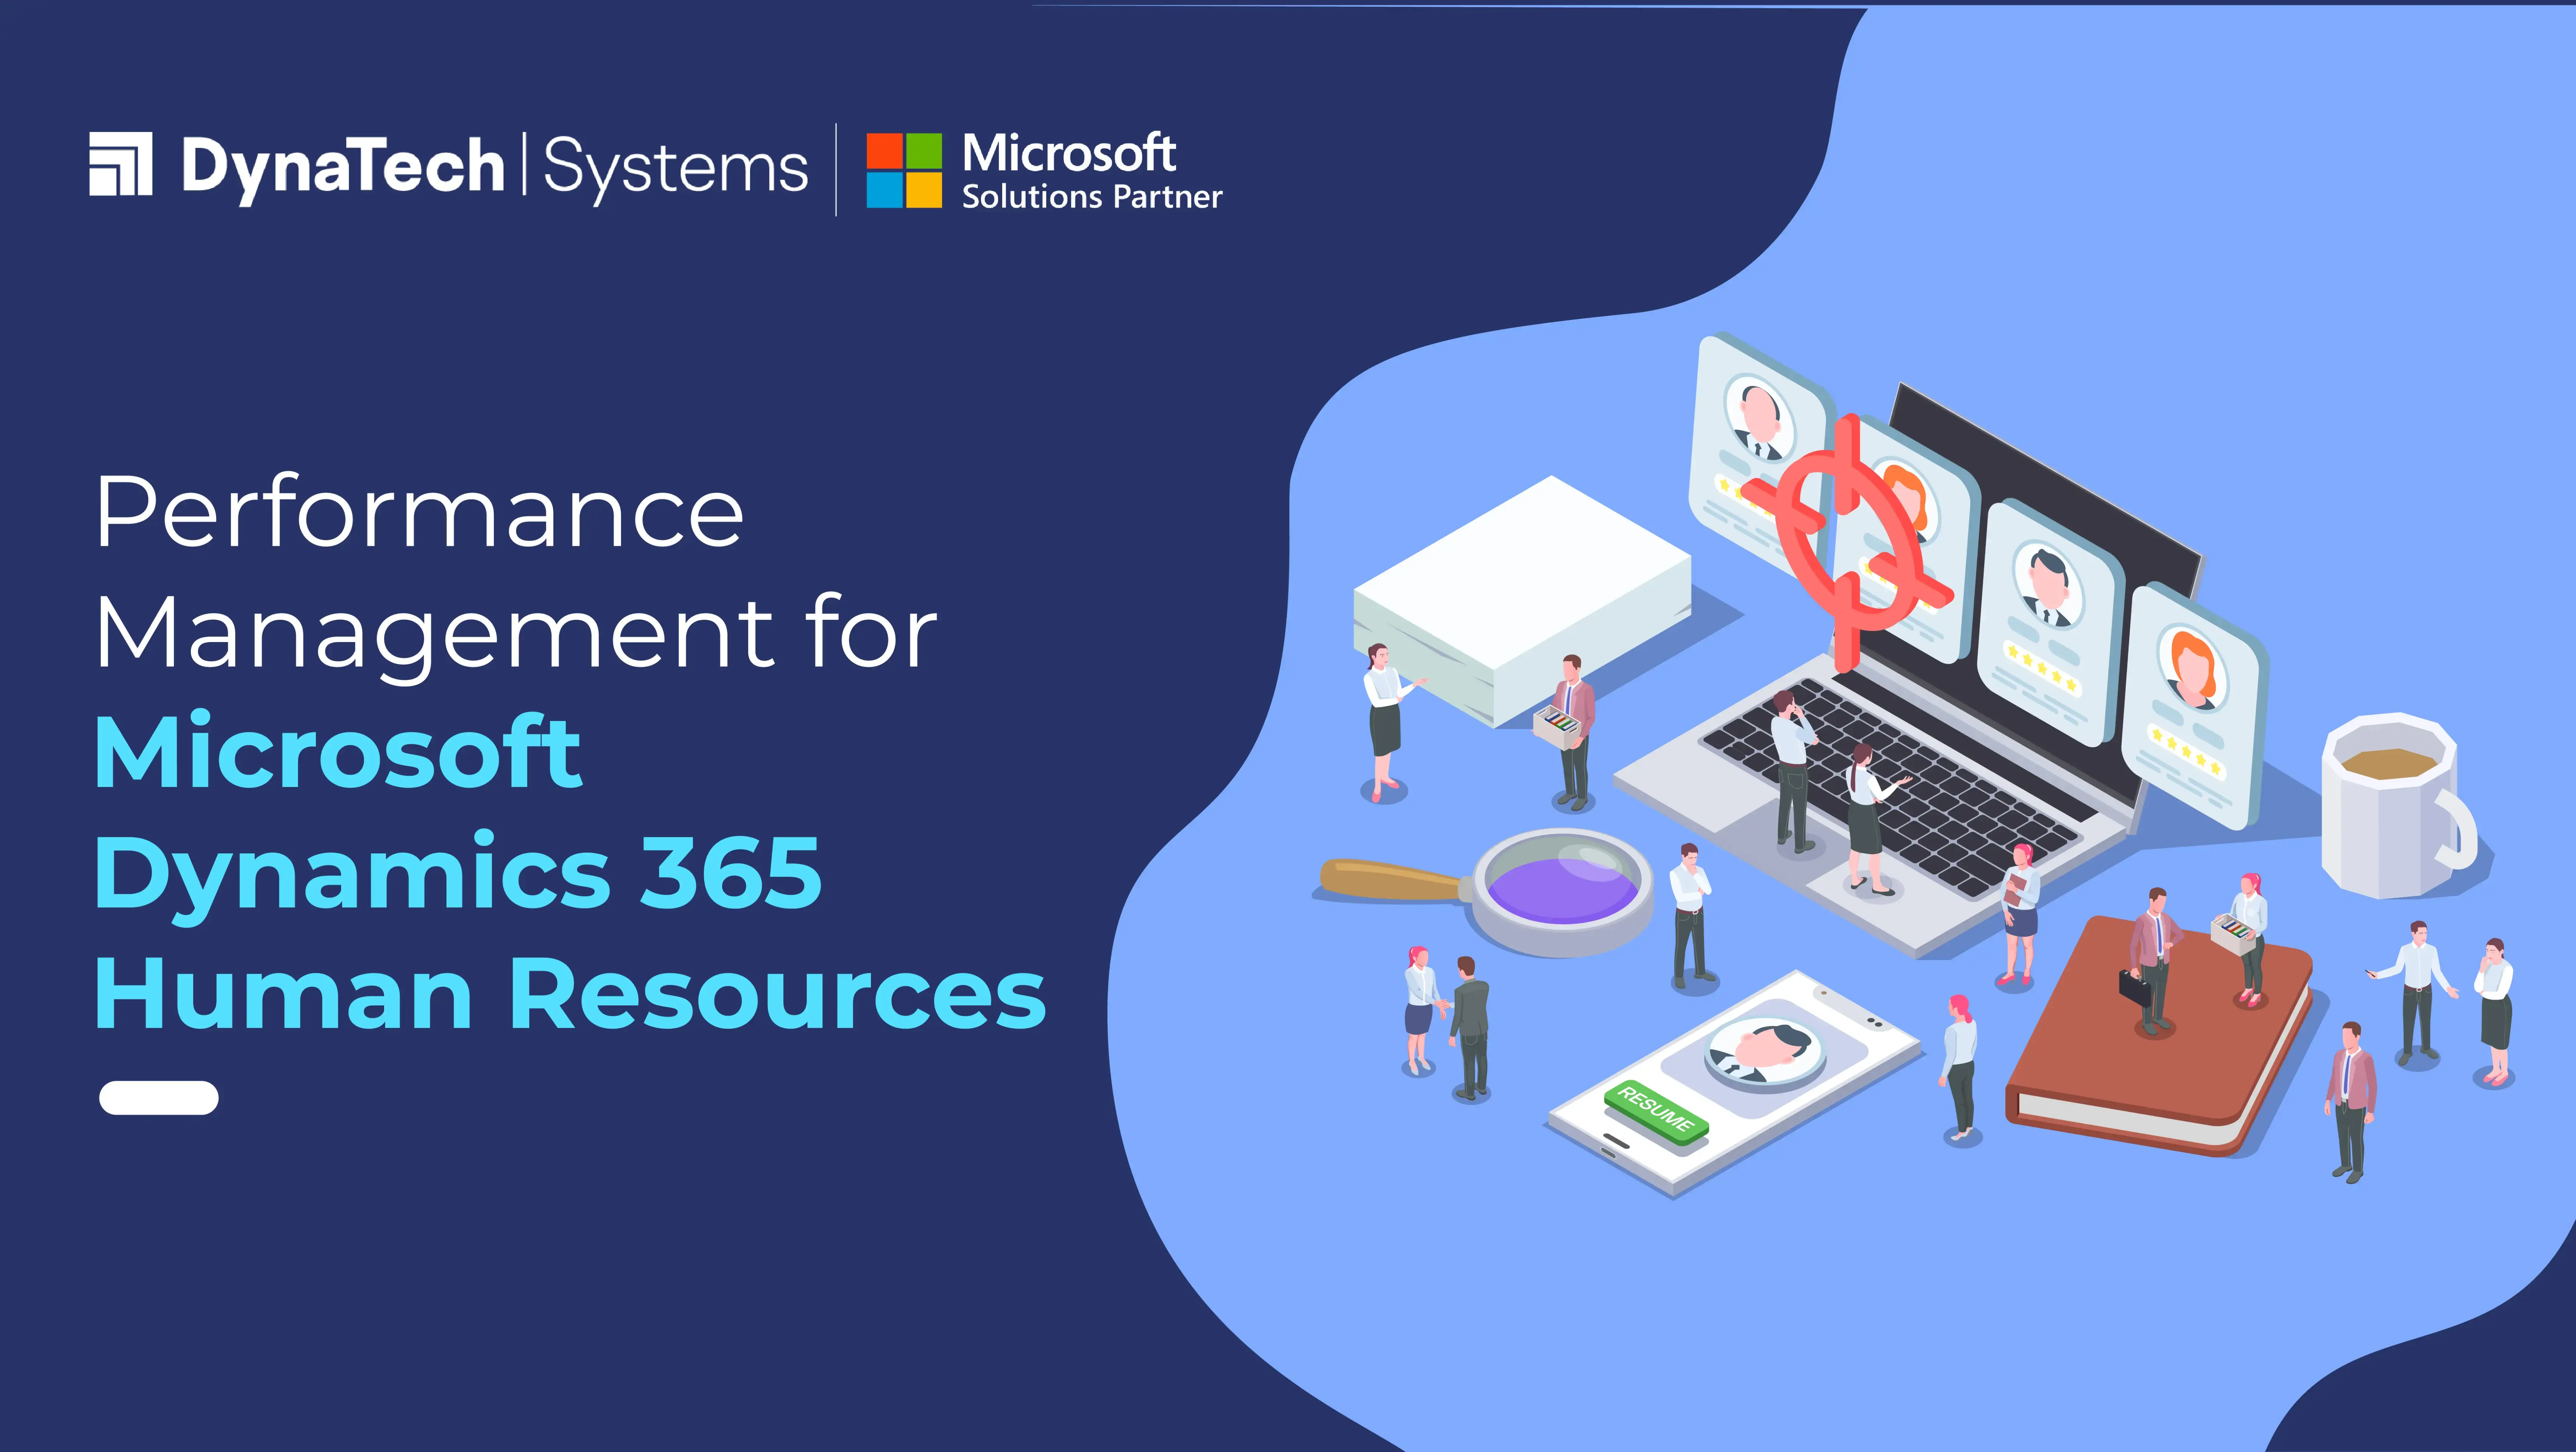 Performance Management for Microsoft Dynamics 365 Human Resources